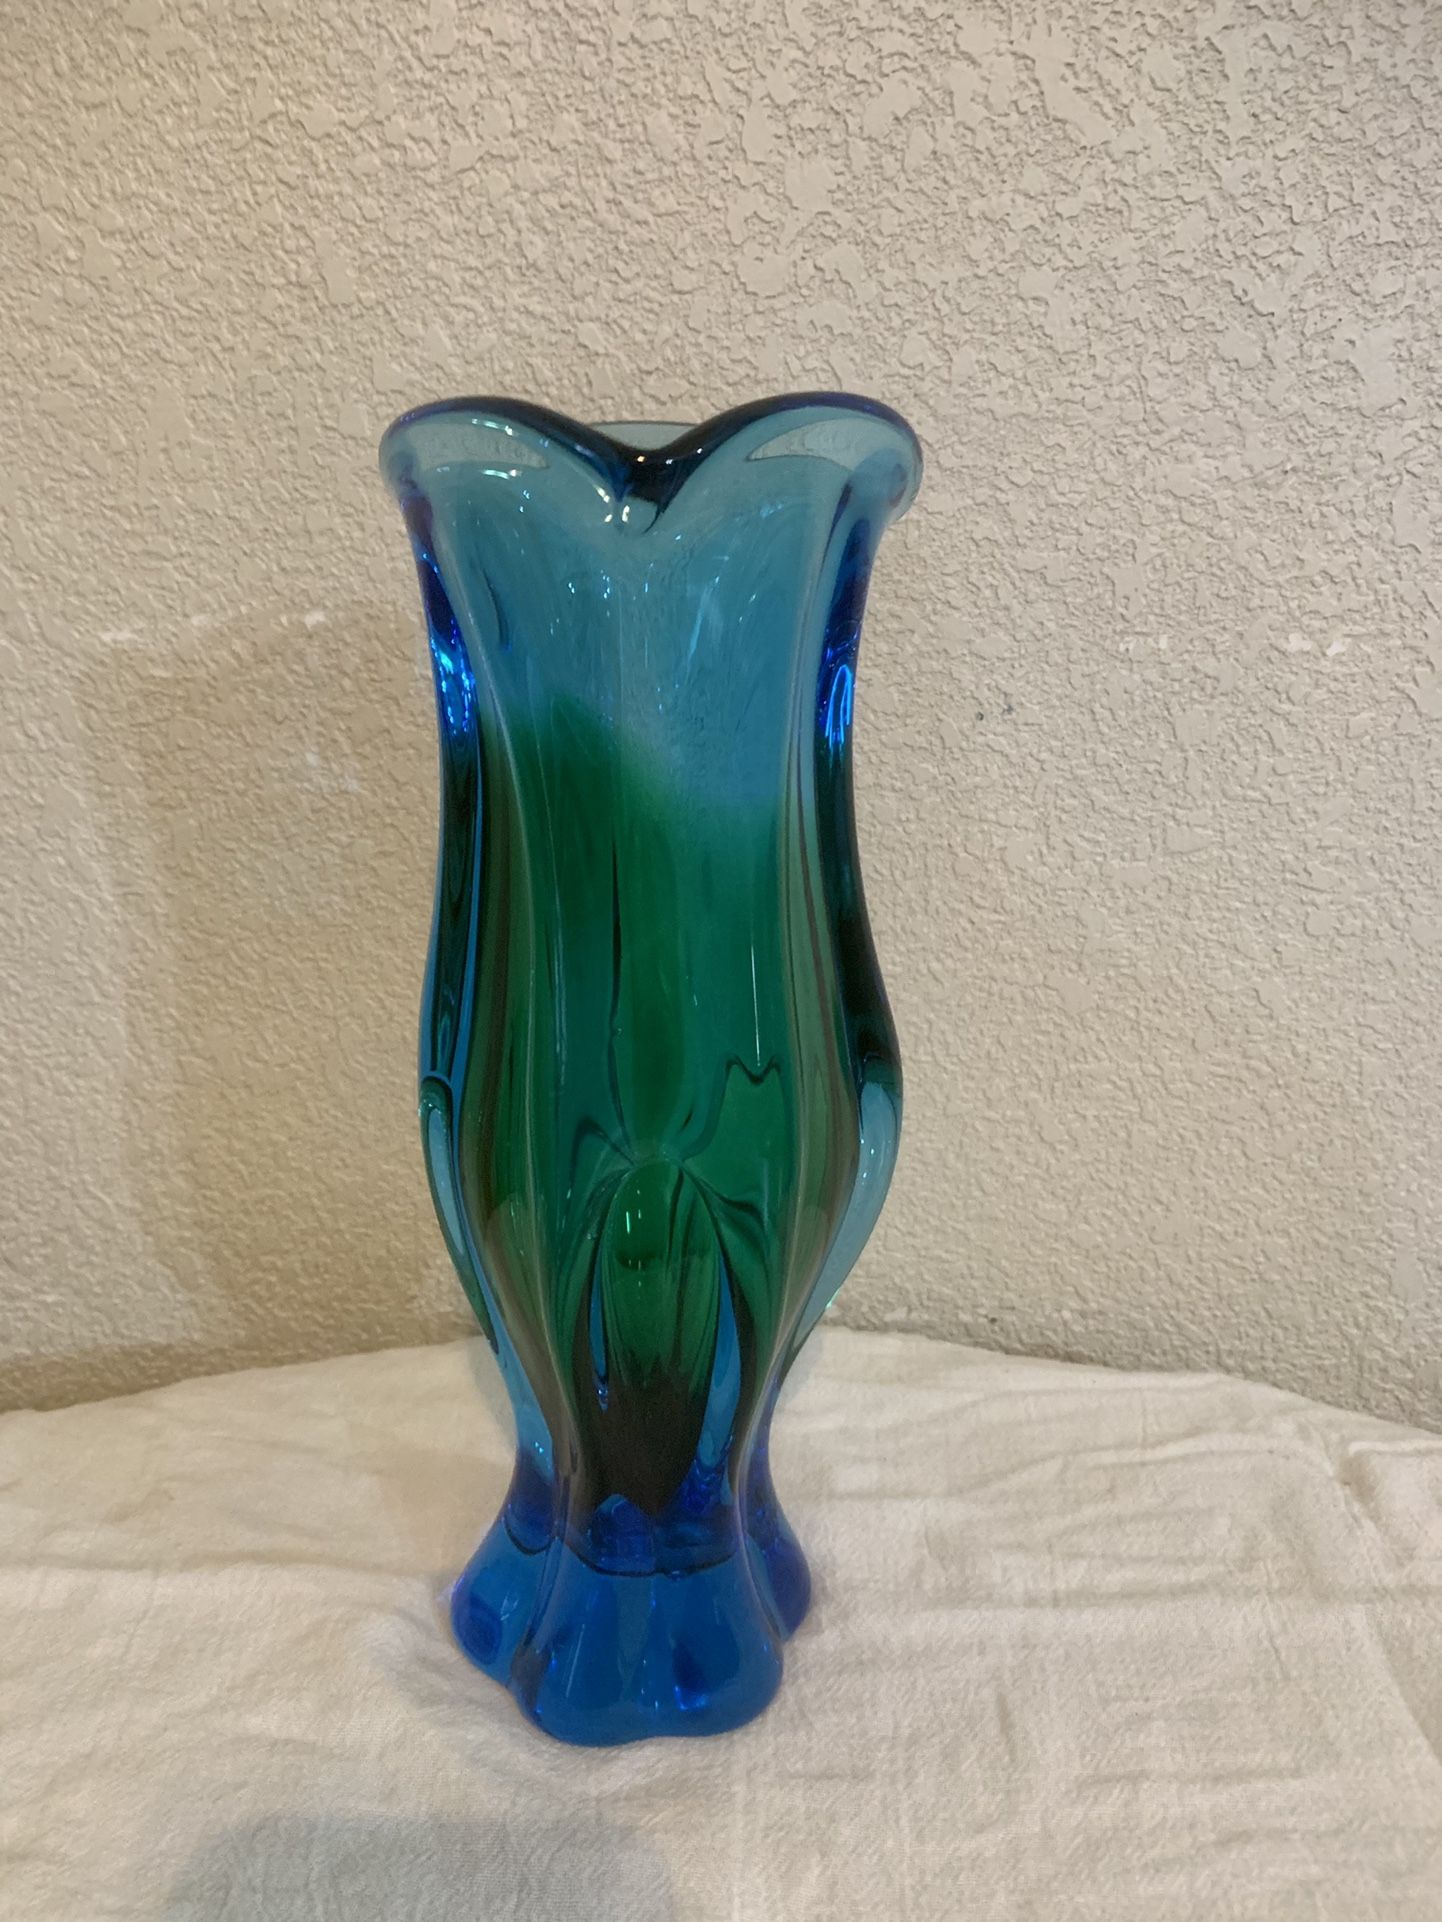 Bohemia Czech Republic Glass Vase Twisted Base Green Blue Flared Vintage.  Approximately 11.25” tall and 4.5” across the top and weighs about 4.5lbs i